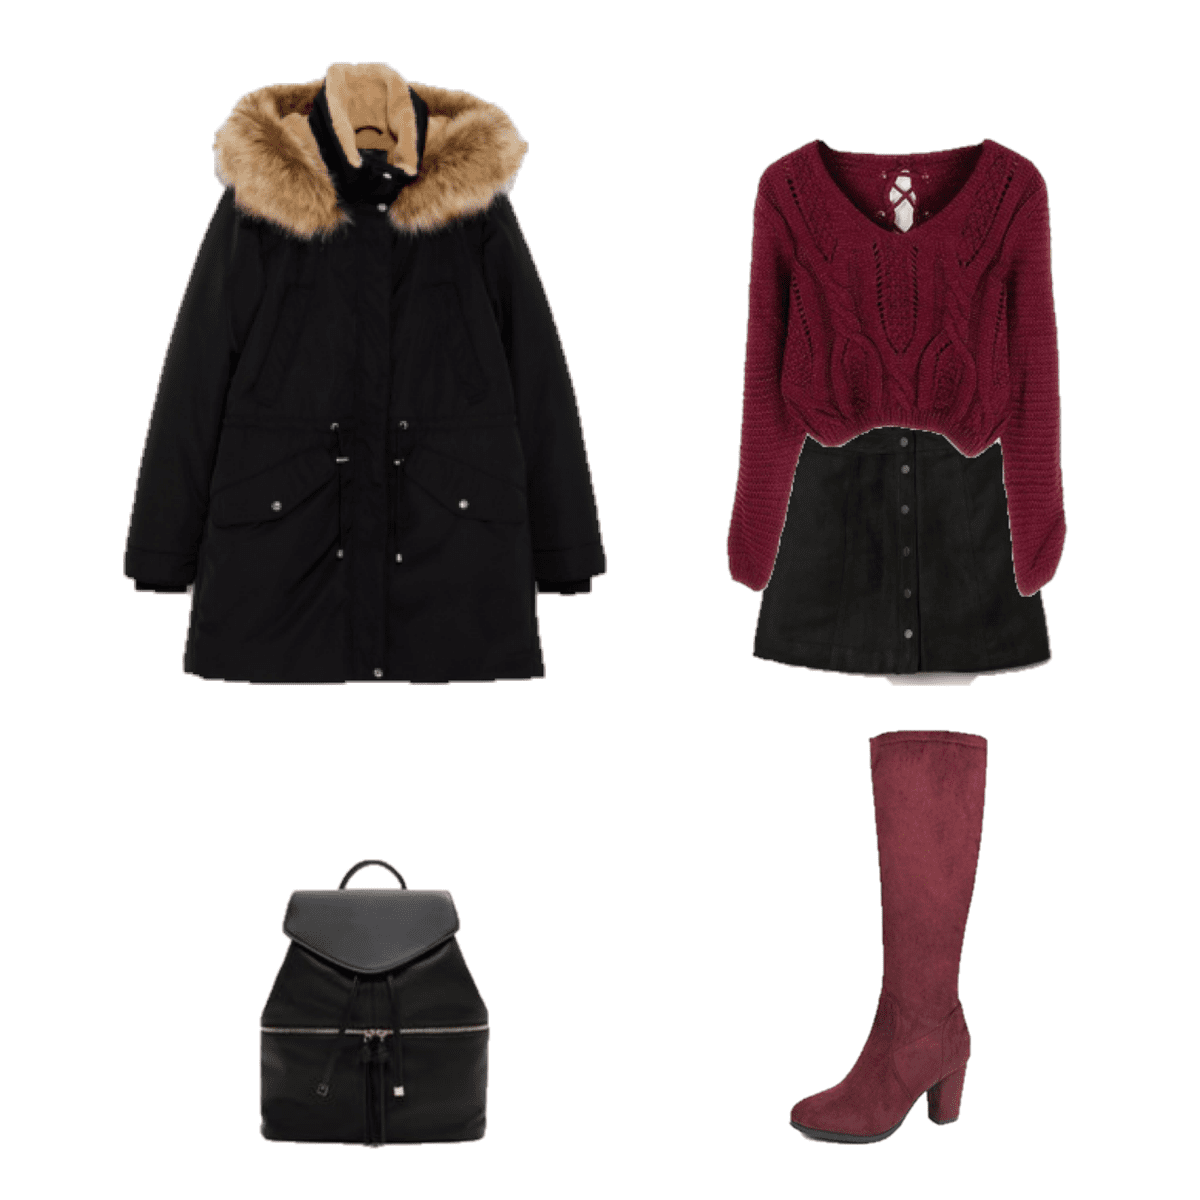 Outfit of the Day: Burgundy Sweater and Boots